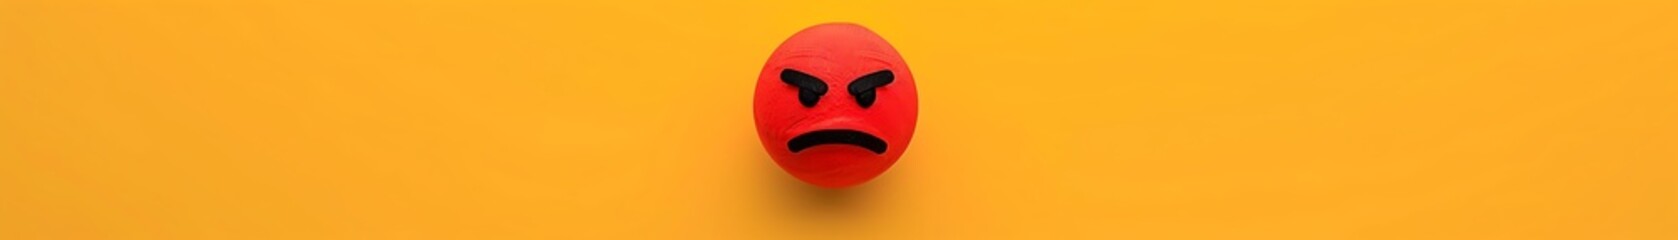 Wall Mural - angry emoji on a lemon yellow background with space for text The emoji is bright red with a frowning face